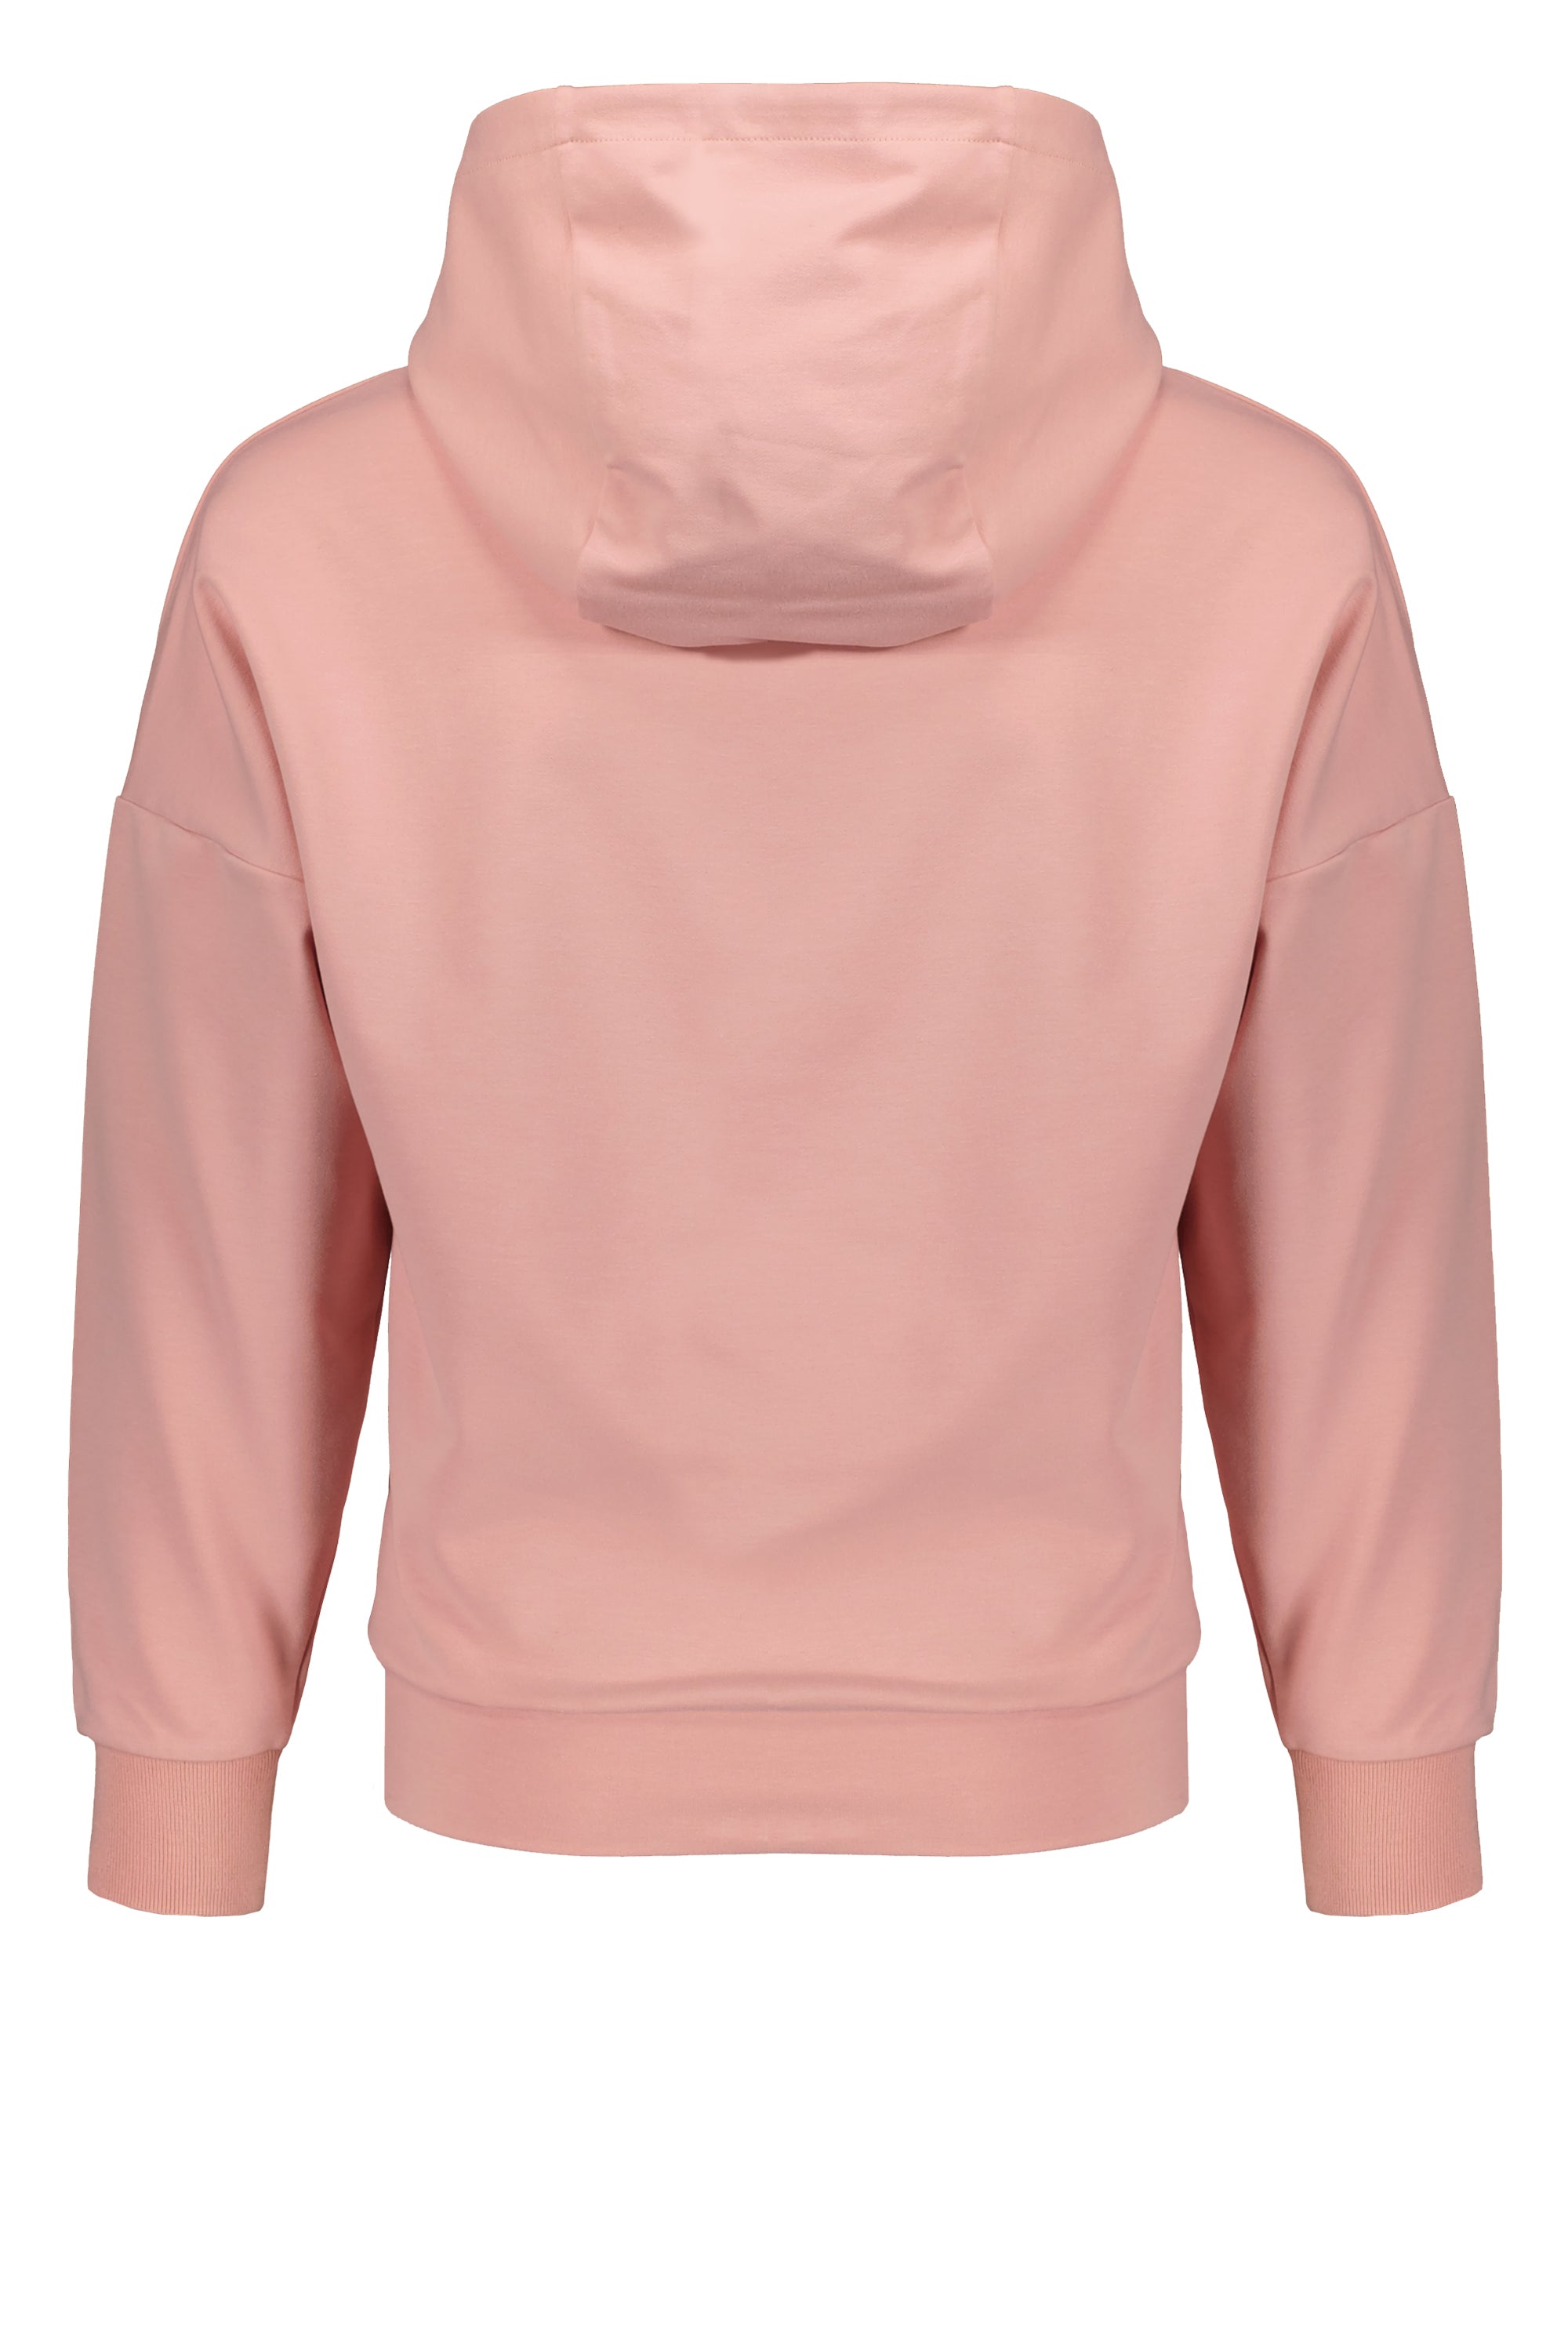 NoBell Kumy hooded sweat with peach finish: NBLL x you